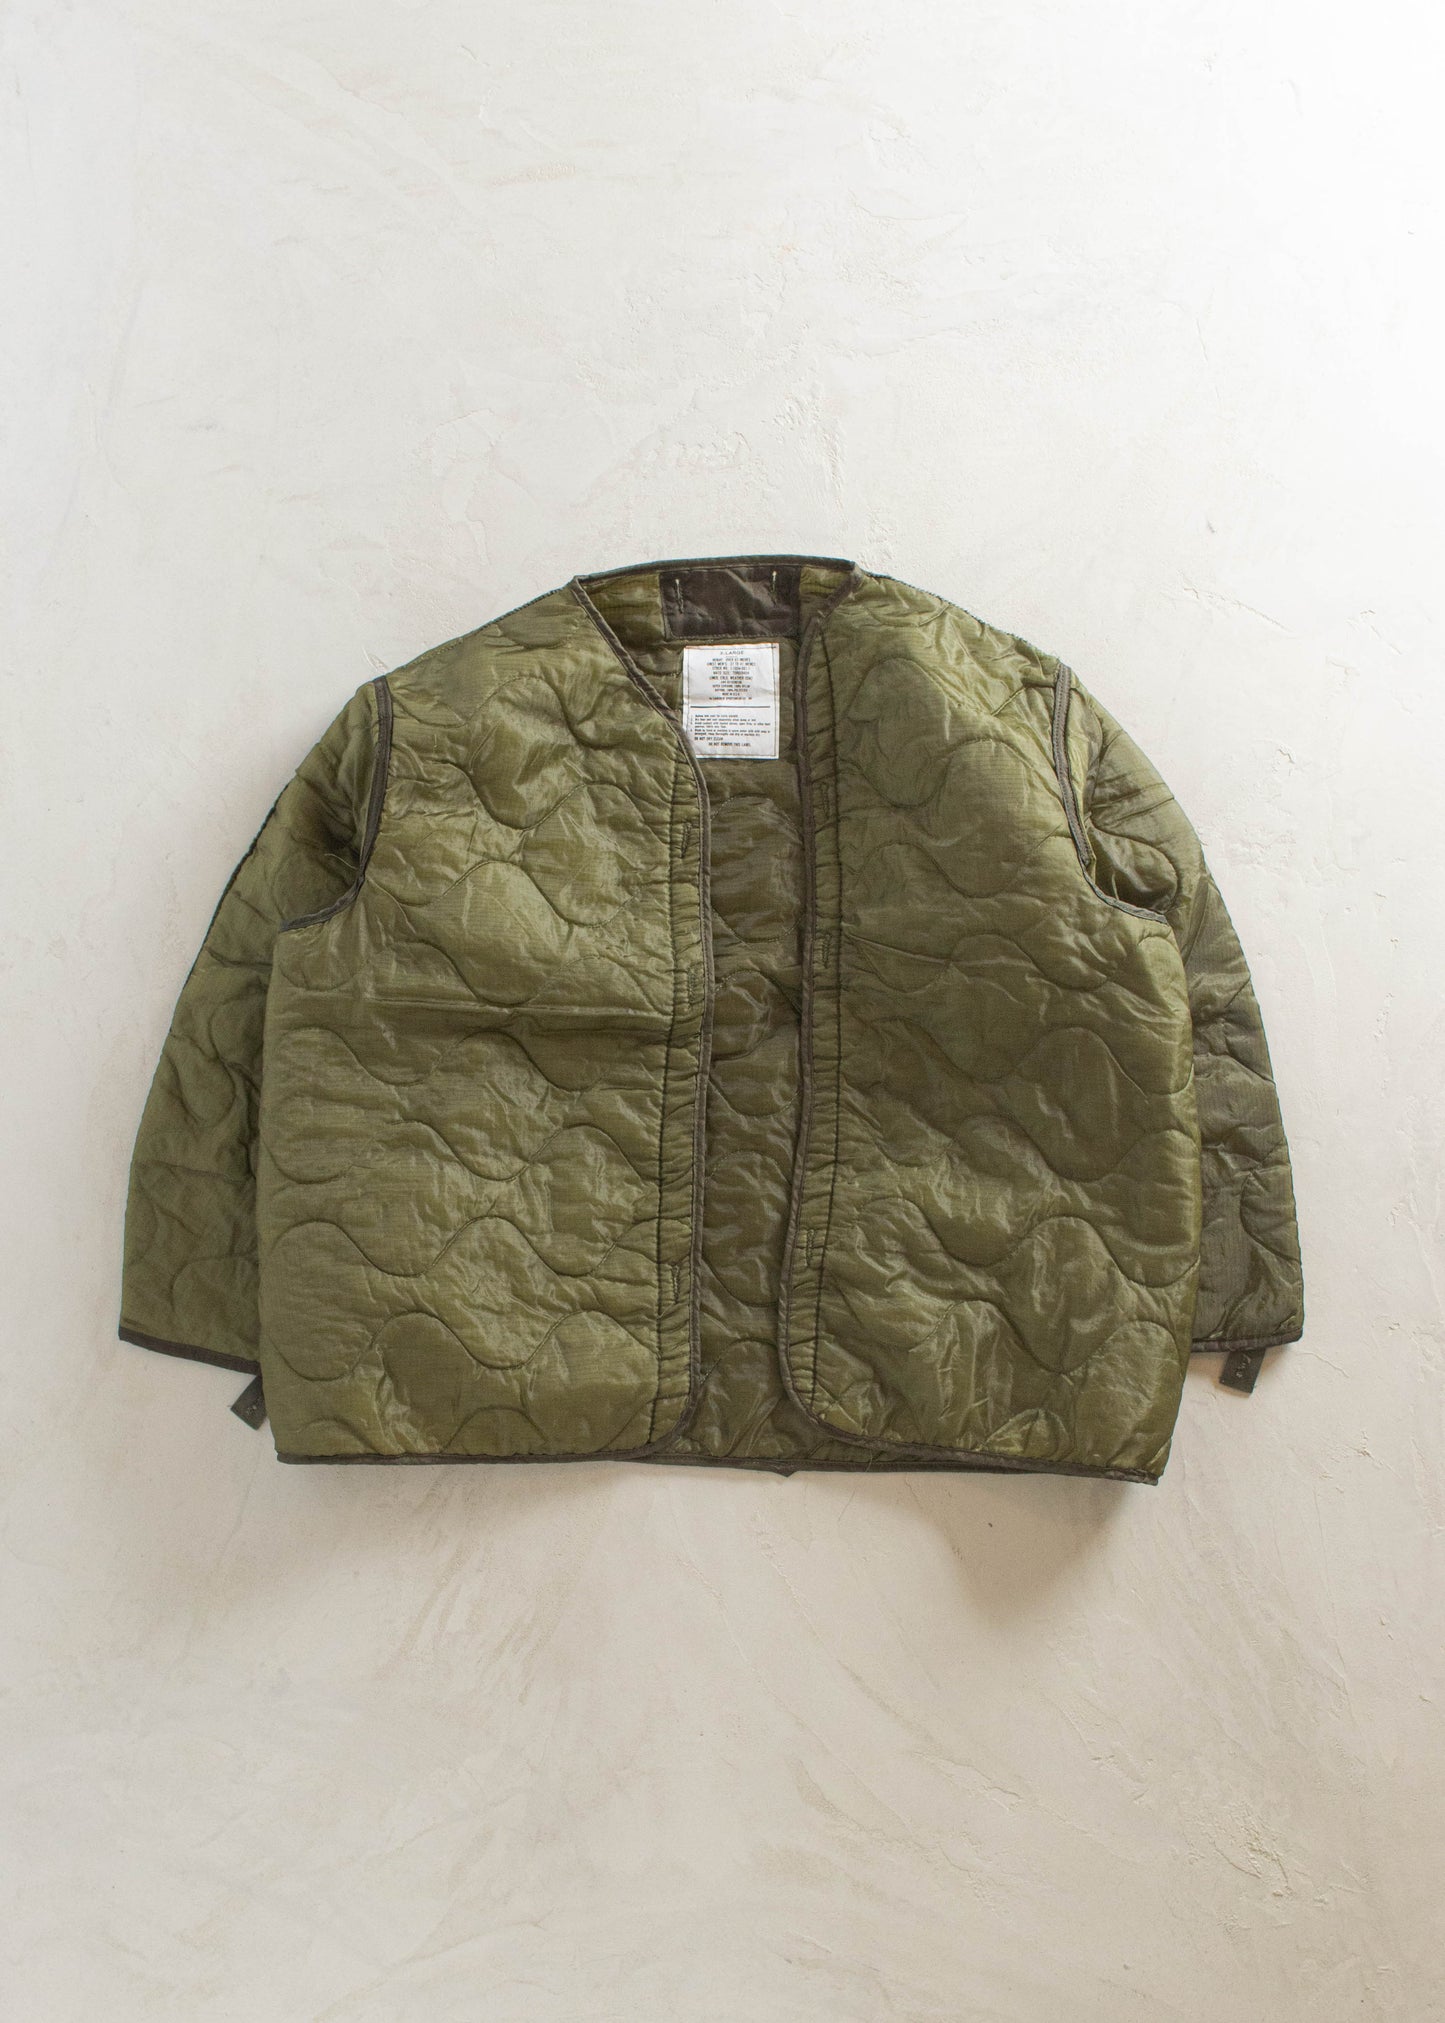 1980s Military M-65 Quilted Liner Jacket Size 2XL/3XL